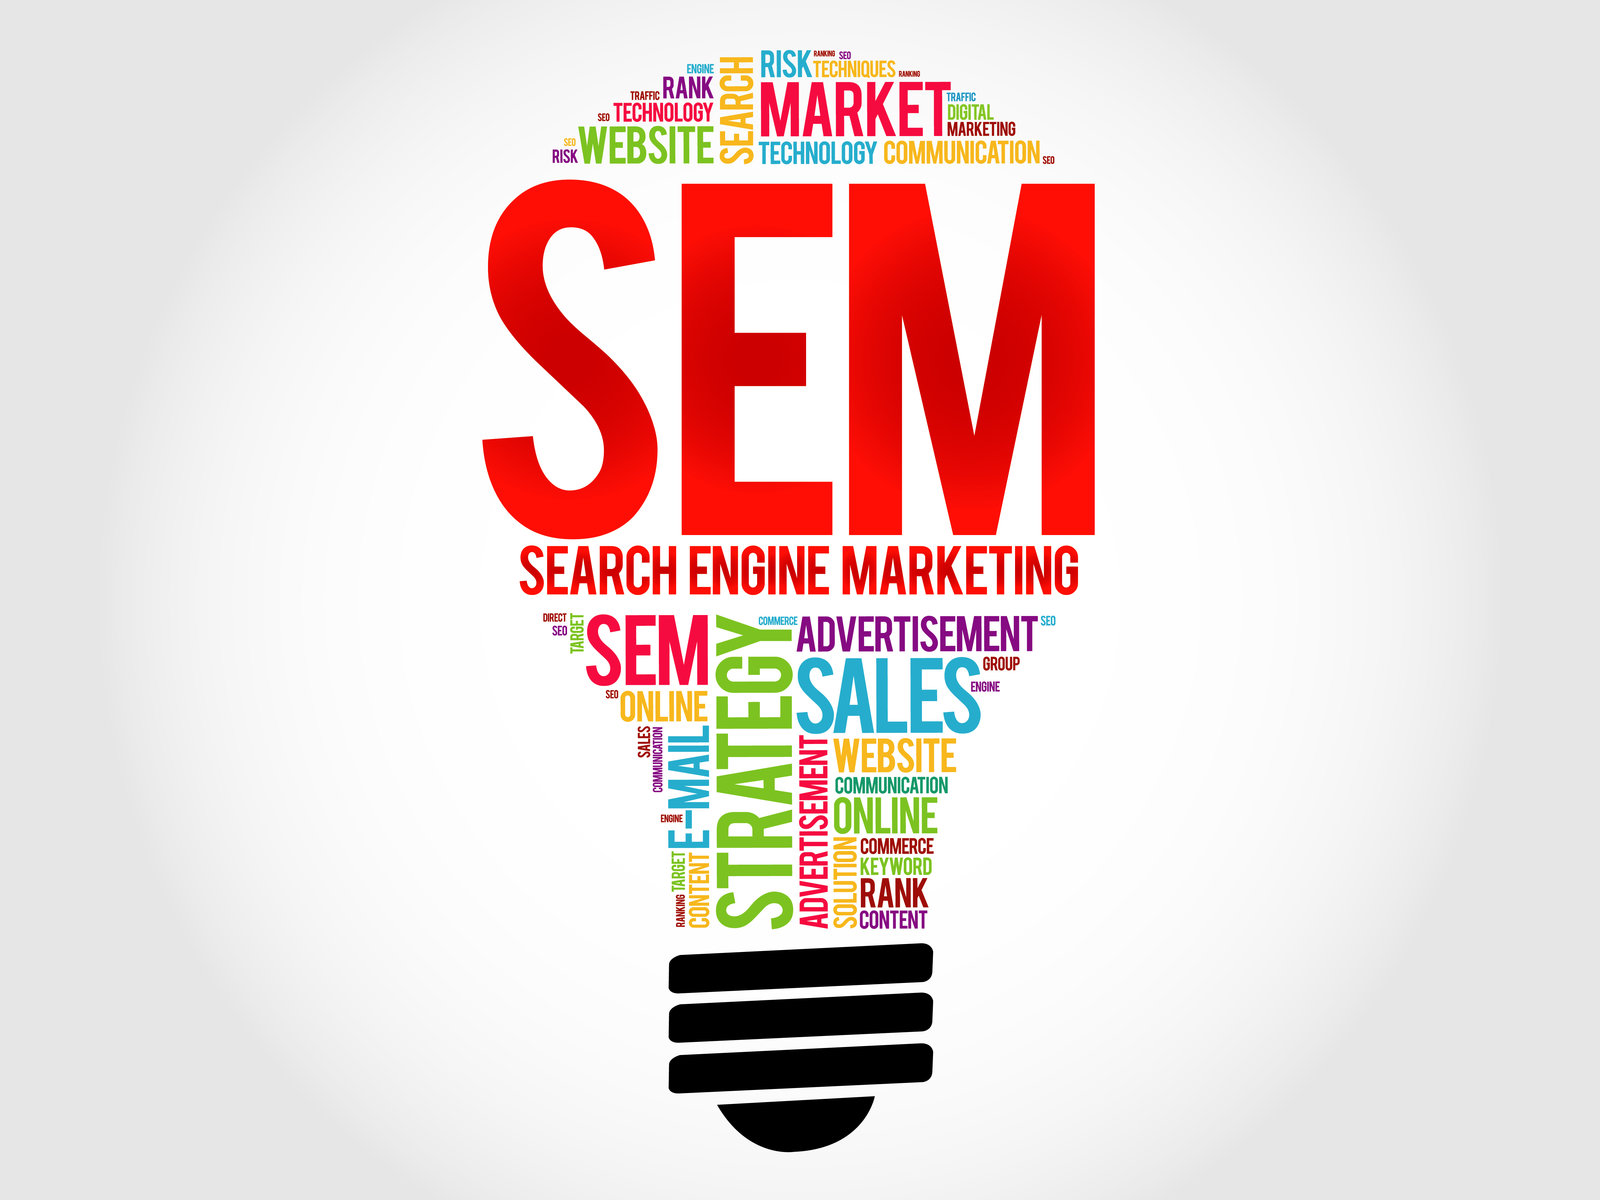 How Can Higher Education Marketing Consultants Help Reduce SEM Costs?